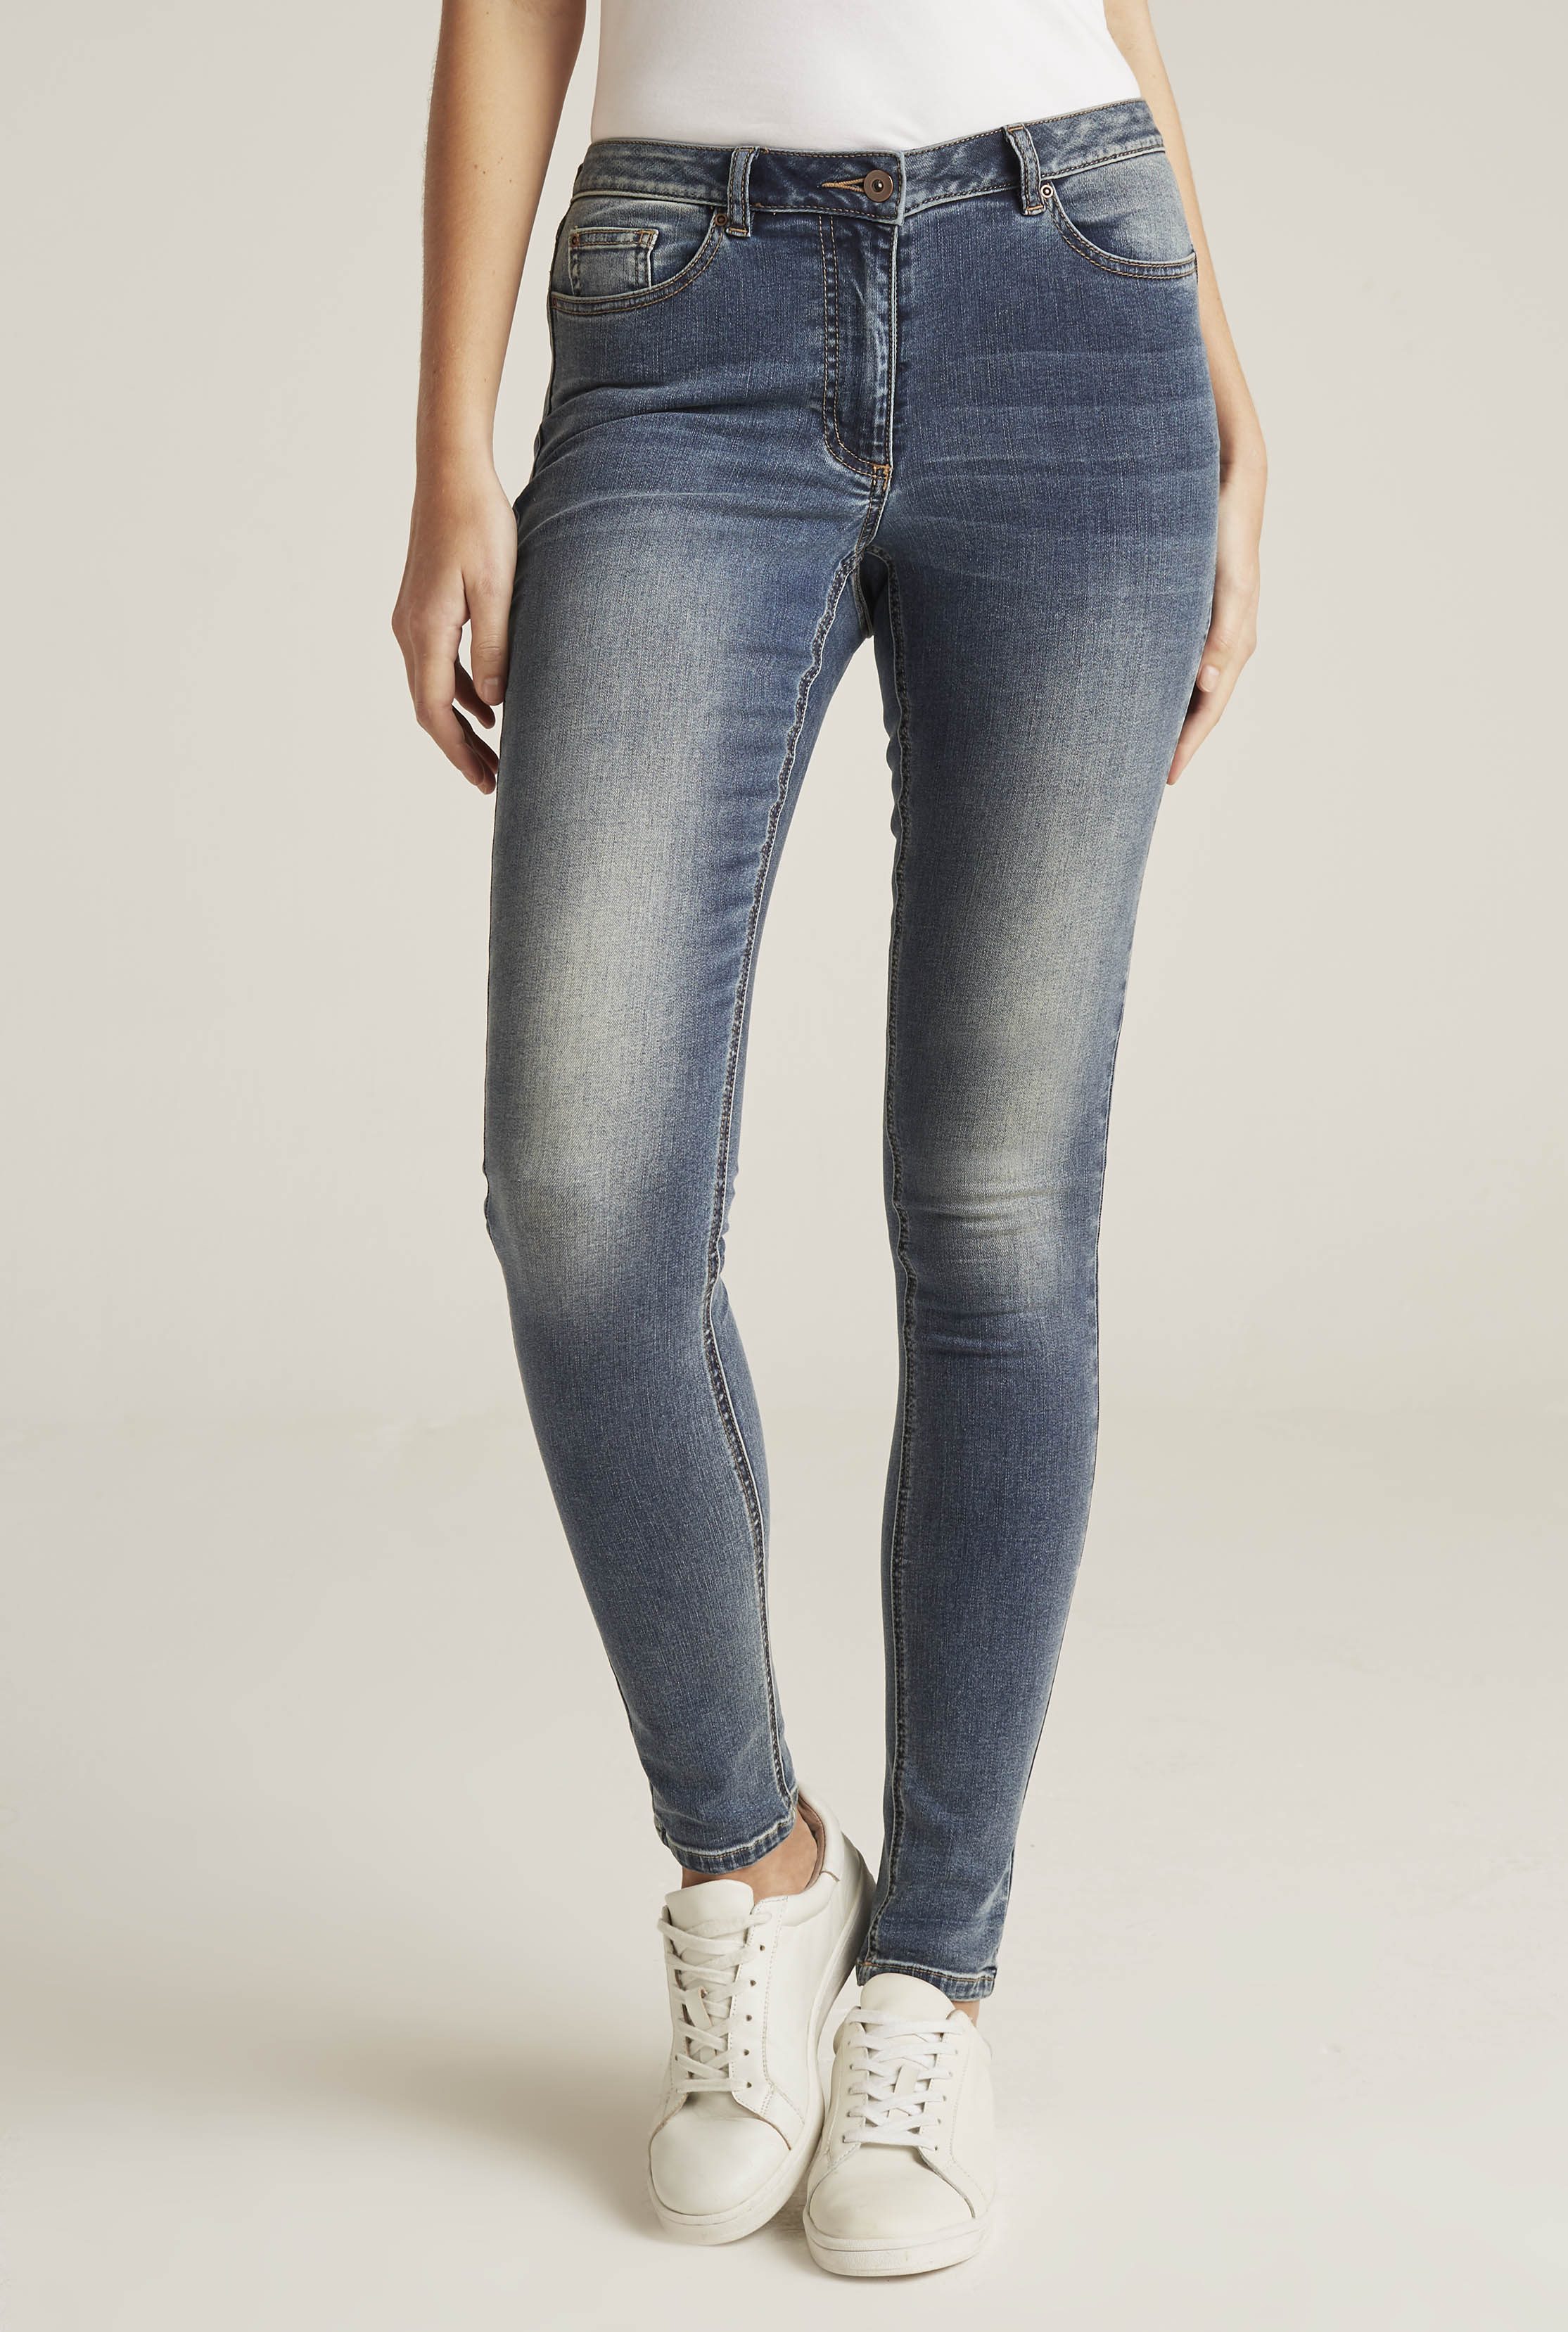 Blue Vintage Wash Skinny Low Rise Jean | Long Tall Sally